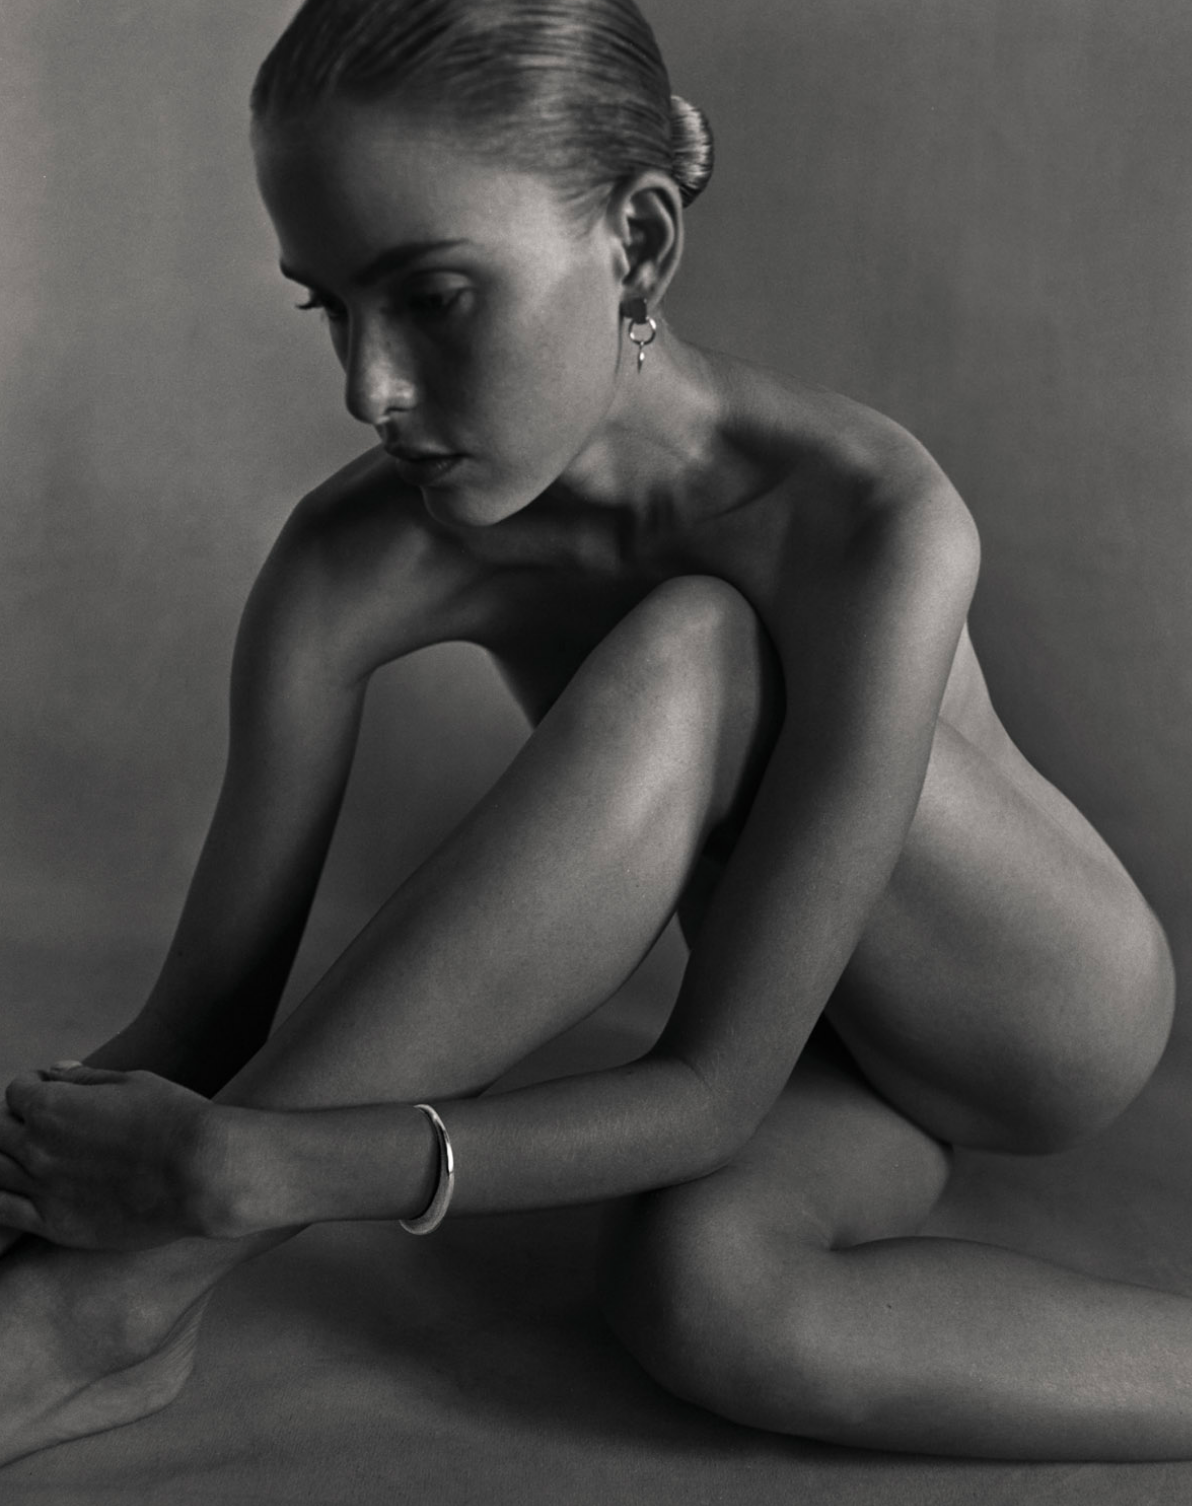 Black and white image of i seira model wearing nothing but the open bangle and the geometric pod earrings